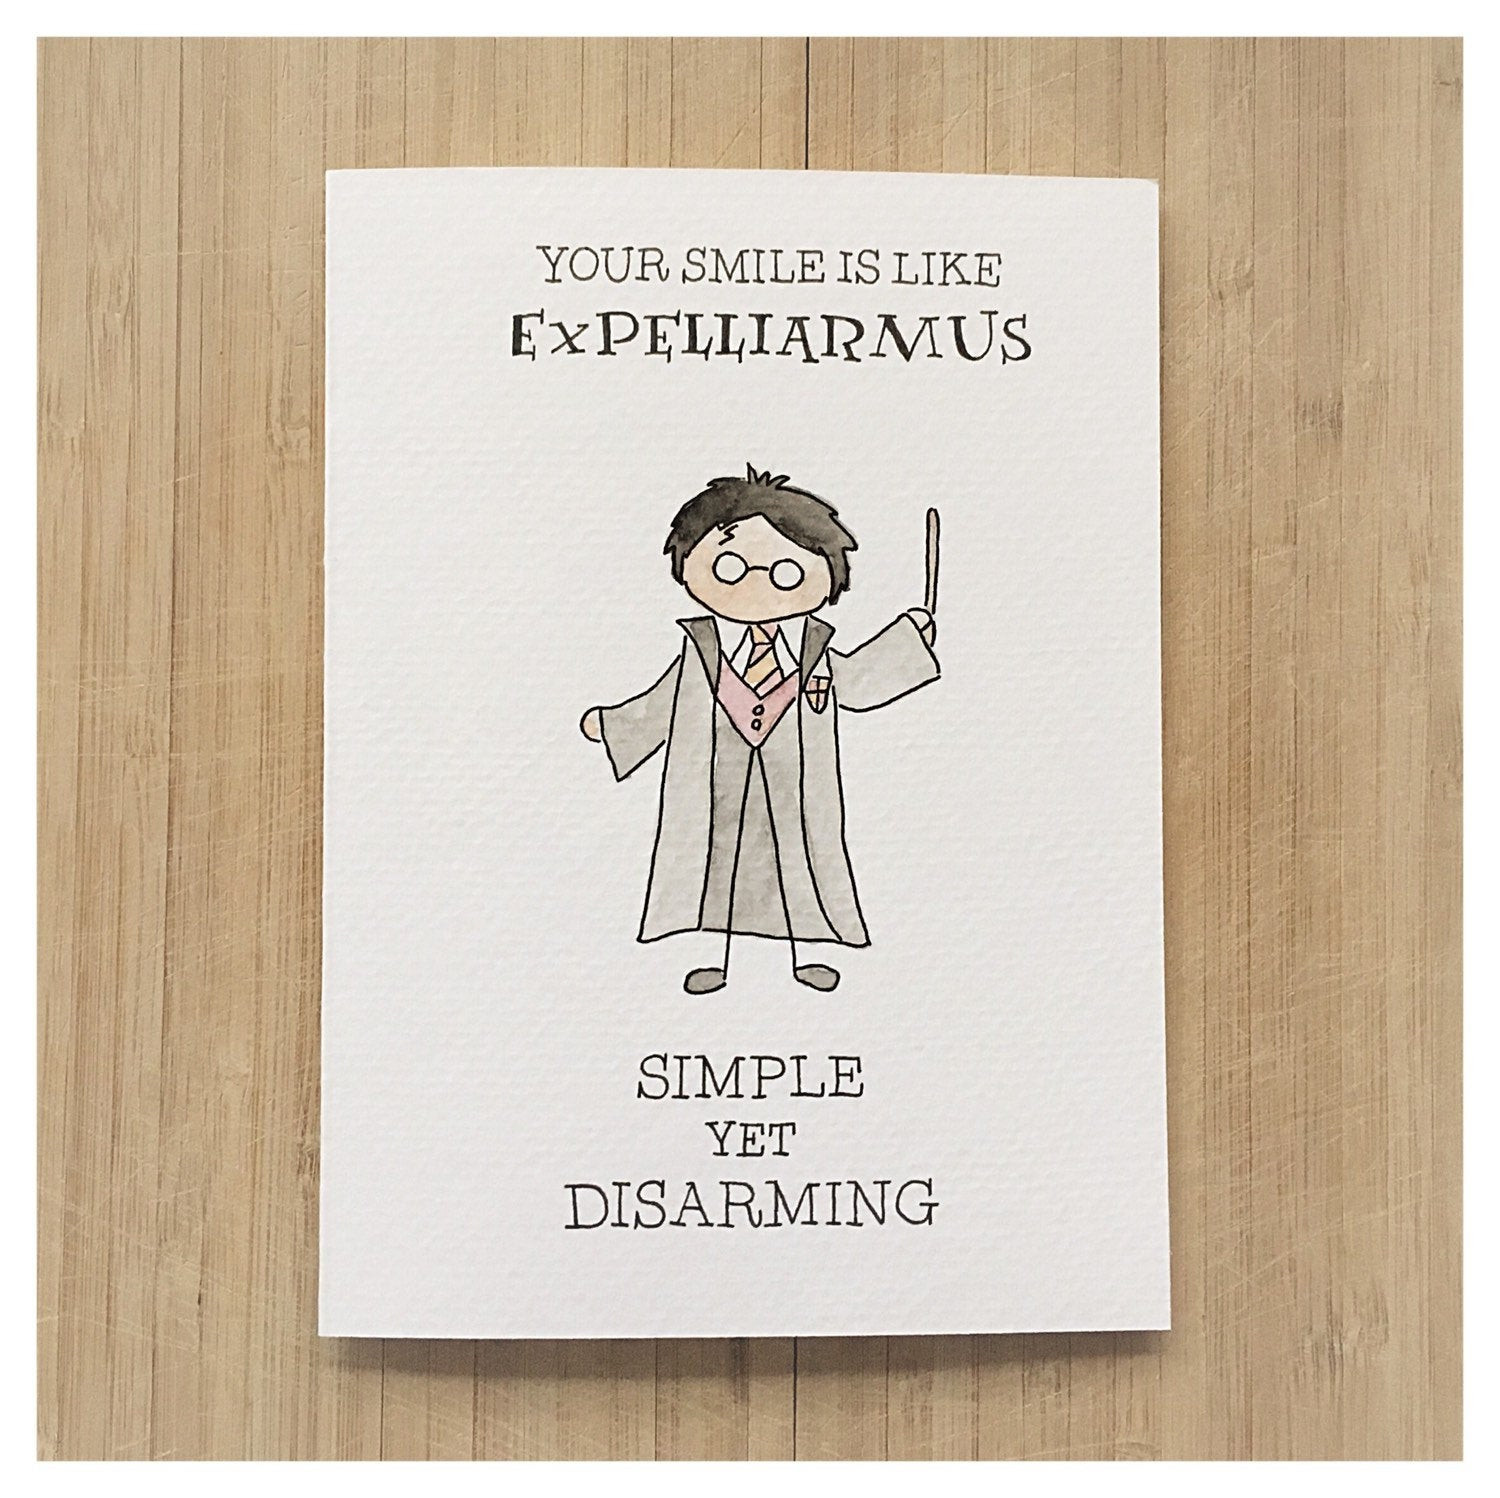 Harry Potter Birthday Card
 Harry Potter Greeting Card Harry Potter by kenziecardco on